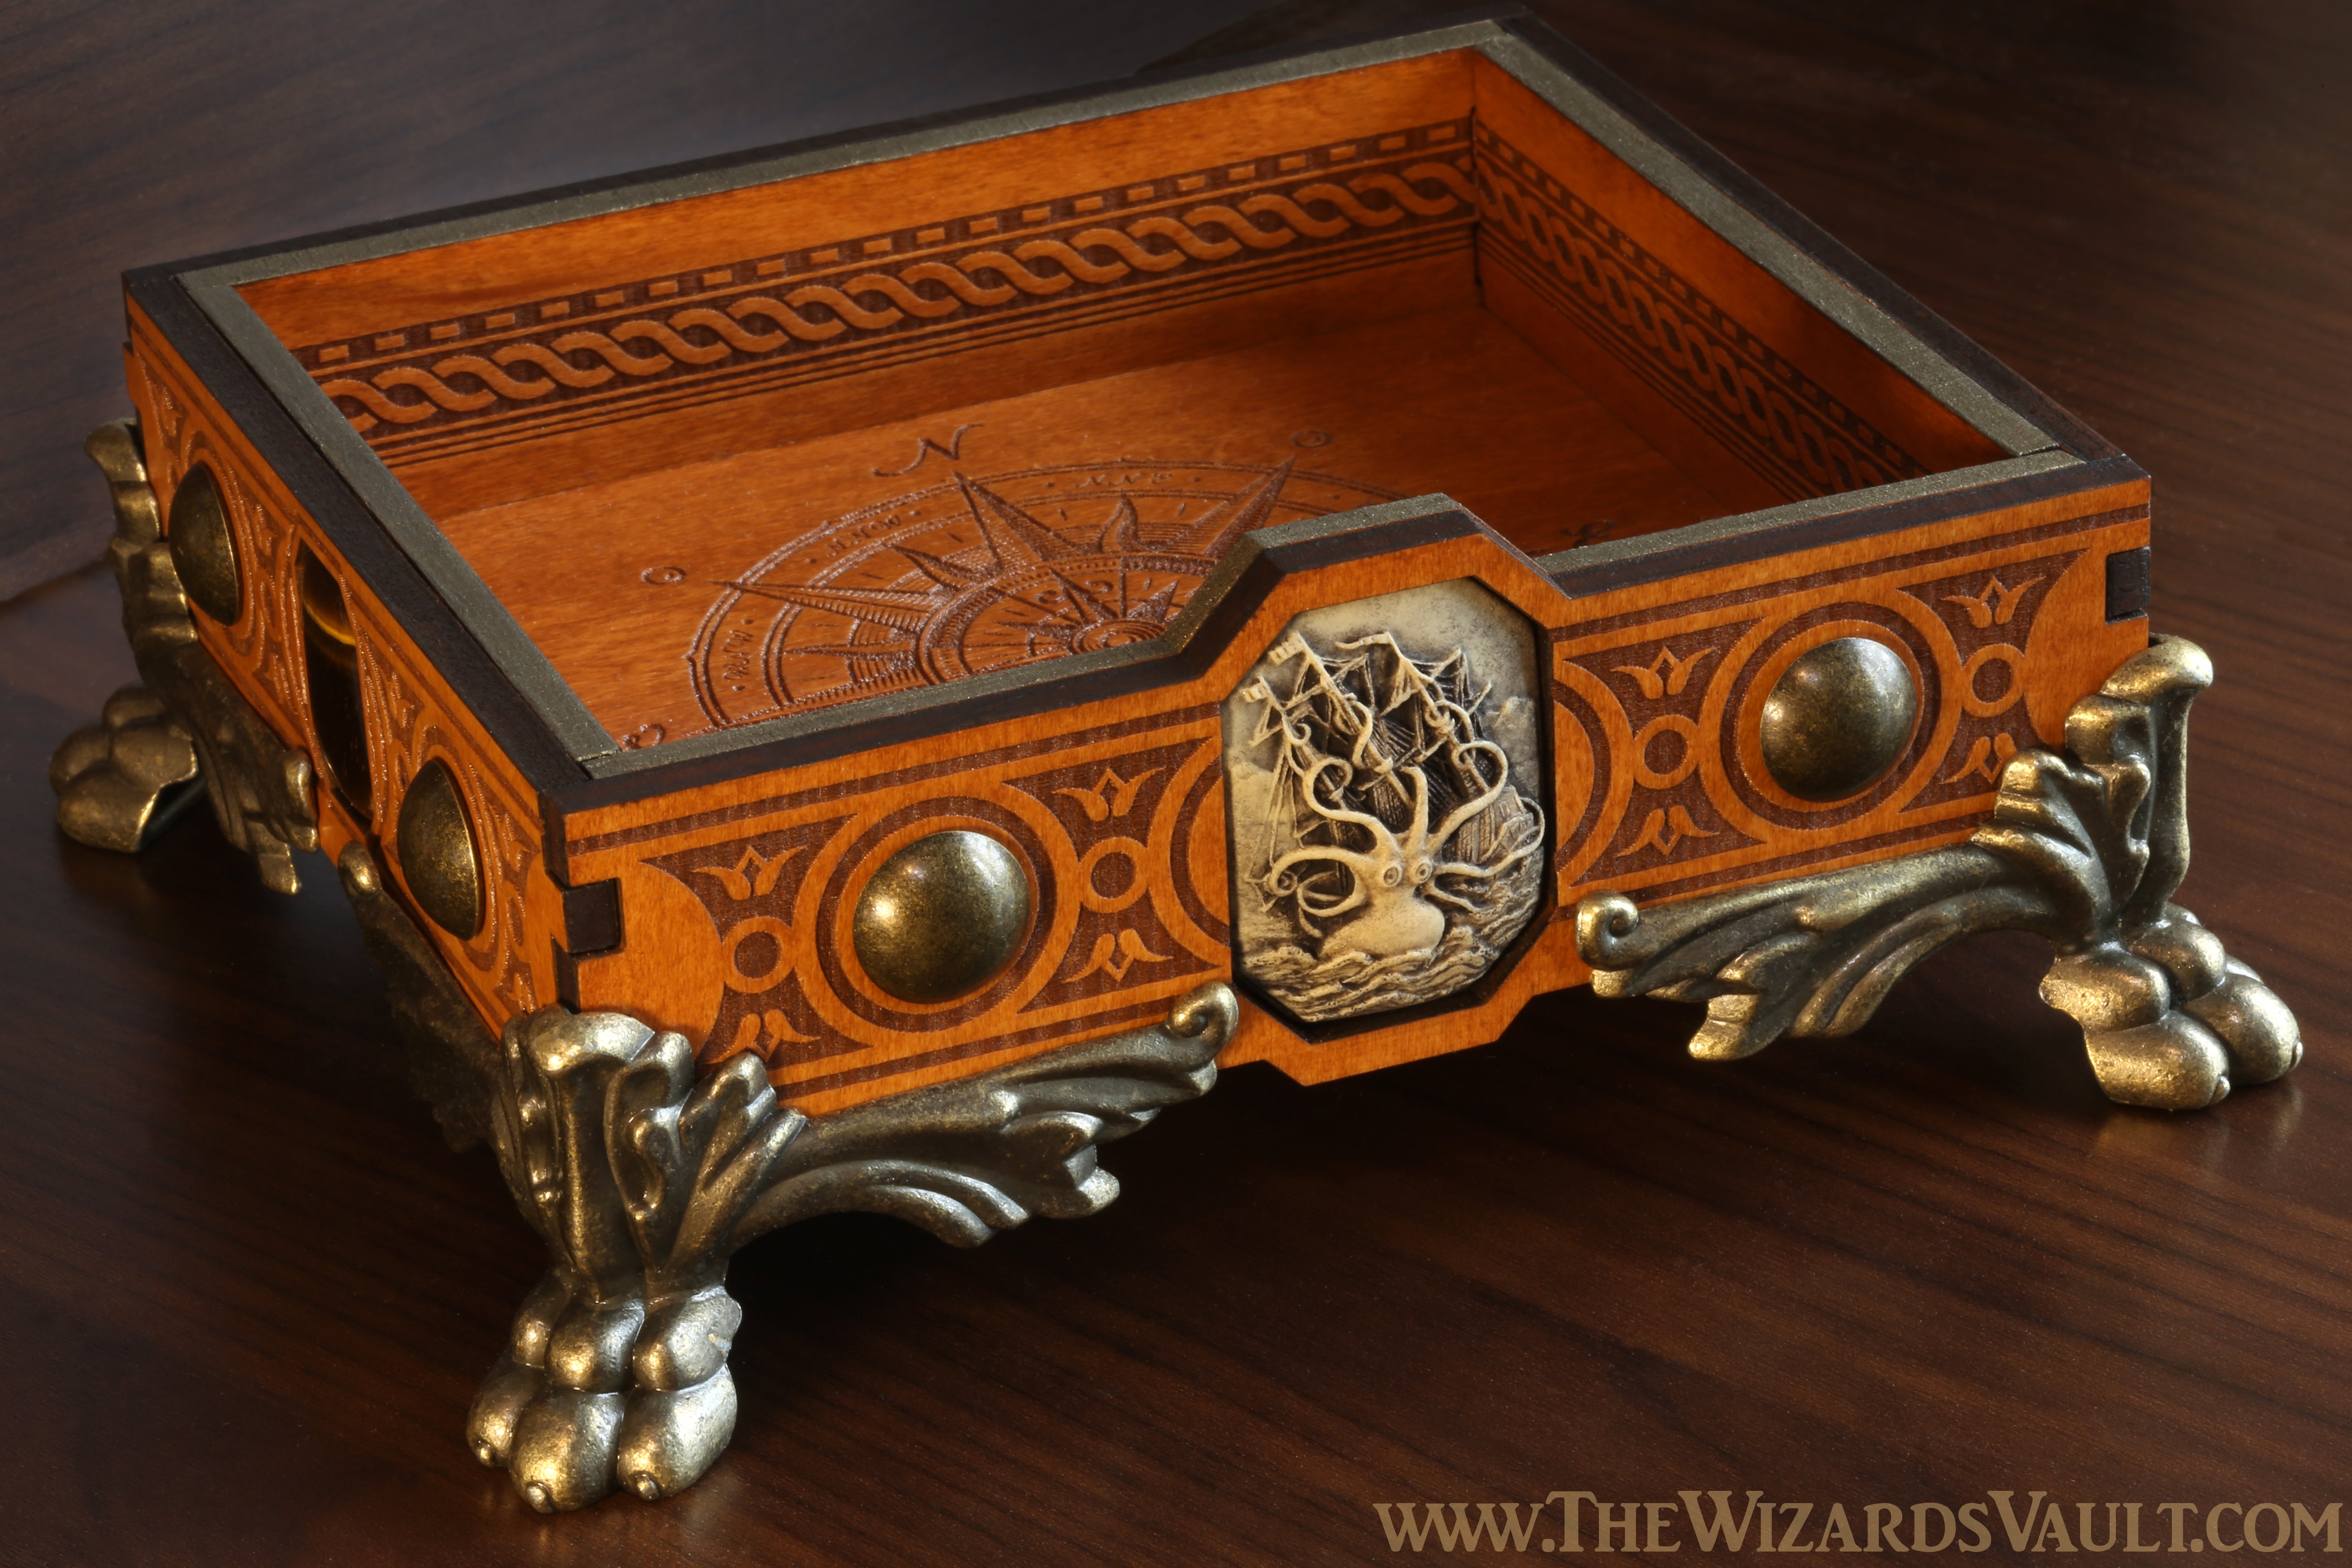 Seafarer's dice tray - Standard size - The Wizard's Vault